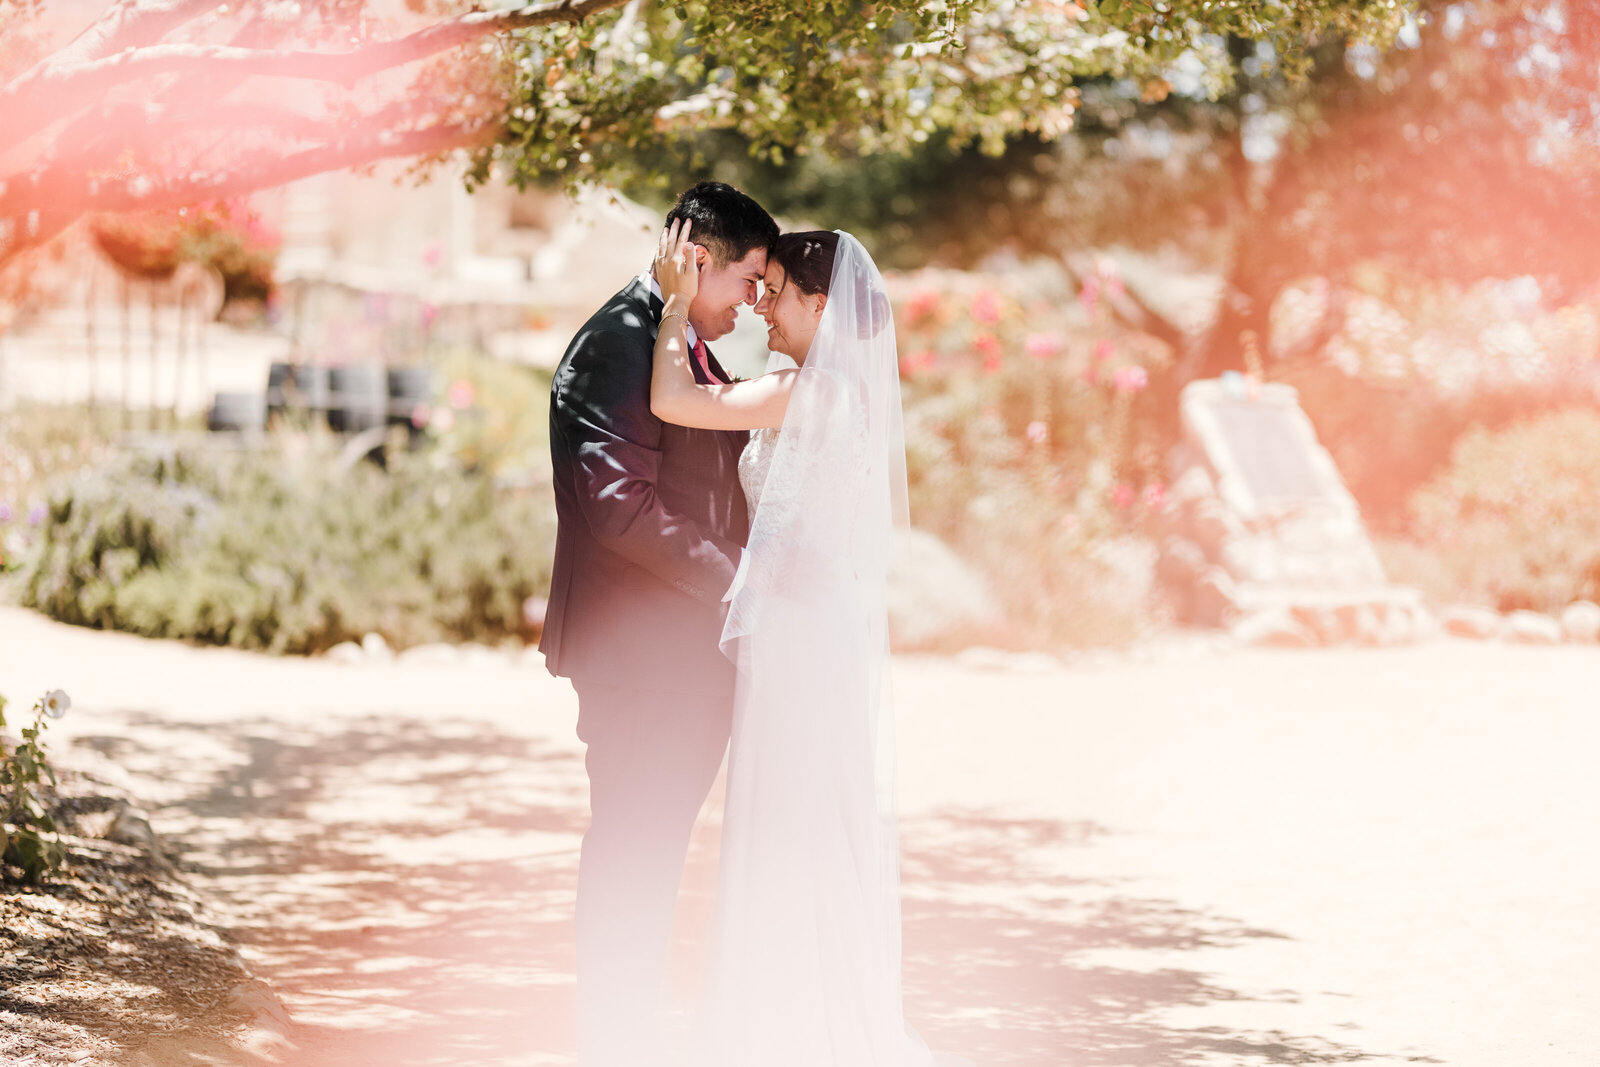 Newlyweds share an intimate moment at San Juan Capistrano Mission